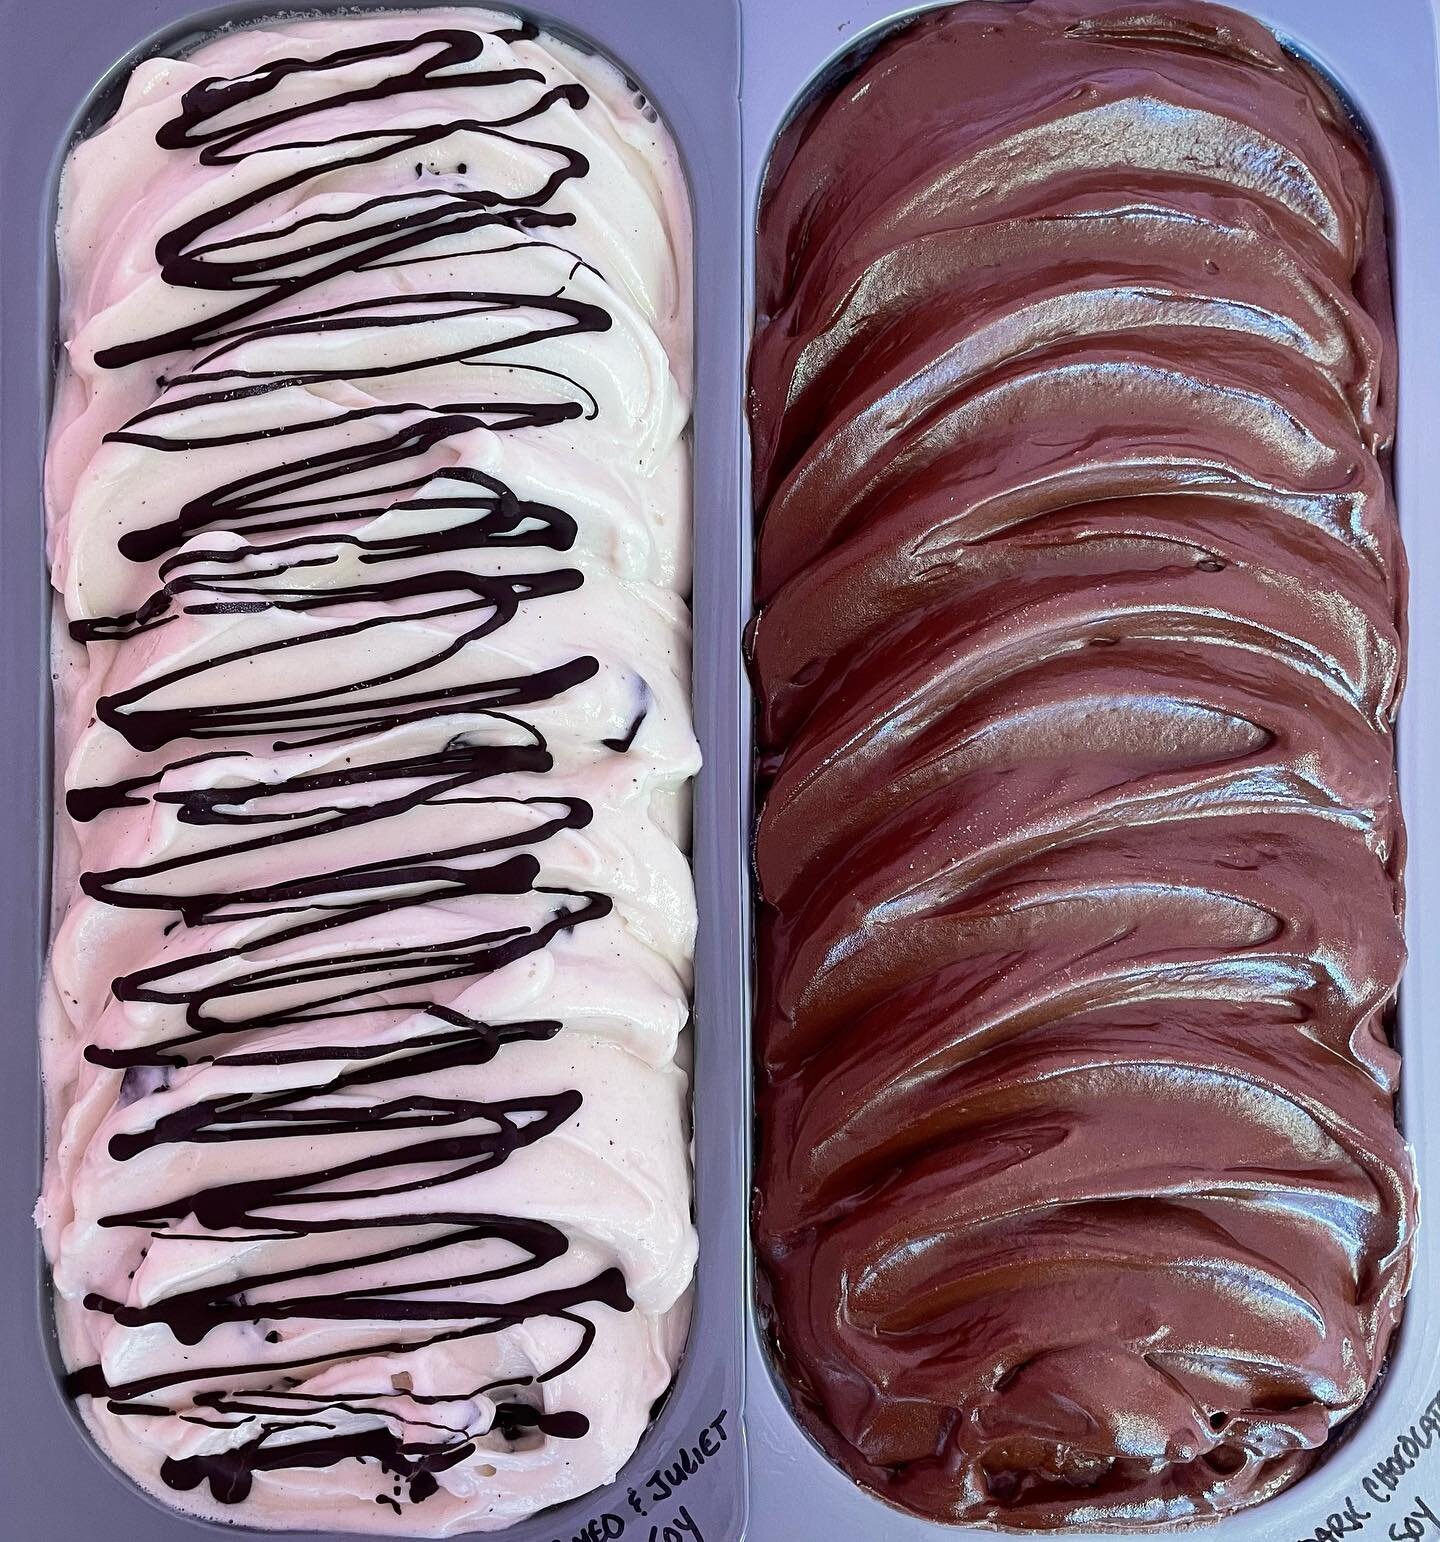 We are open today from 12-6!

The gelato case if full of lots of tasty flavours including these two fan favourites - 

Dark Chocolate &amp; 
Romeo and Juliet (Vanilla with Dark Chocolate Chunks)